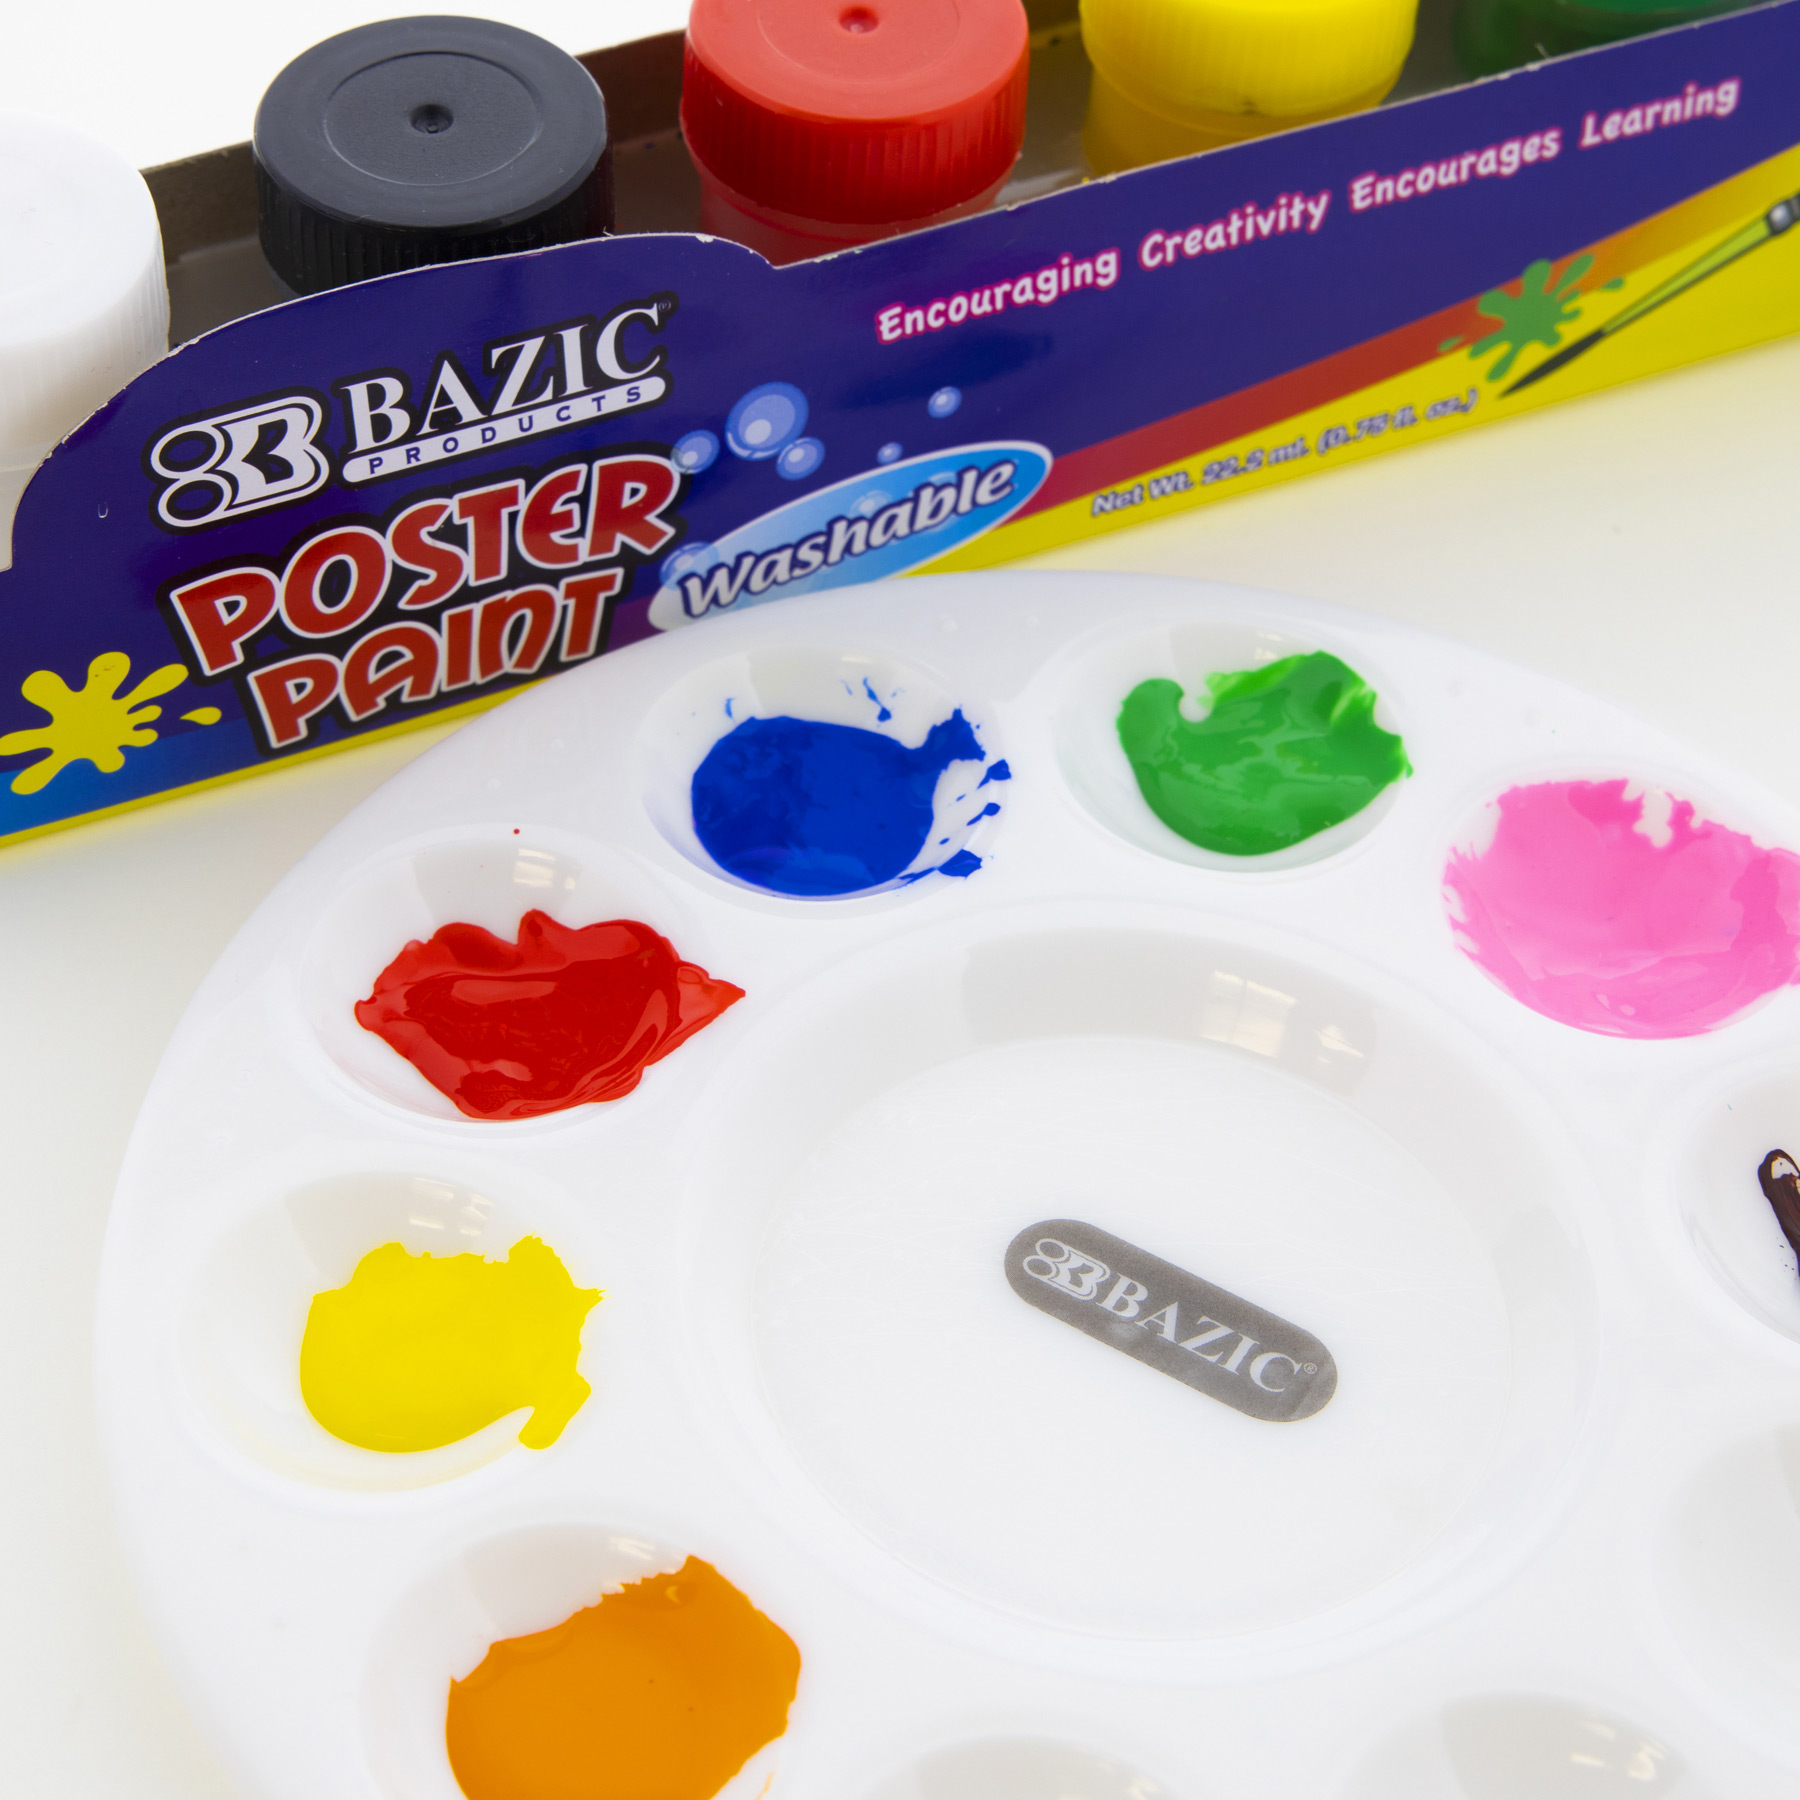 Round 10 Well Plastic Paint Palette for Crafting Painting Sorting Beads Art  